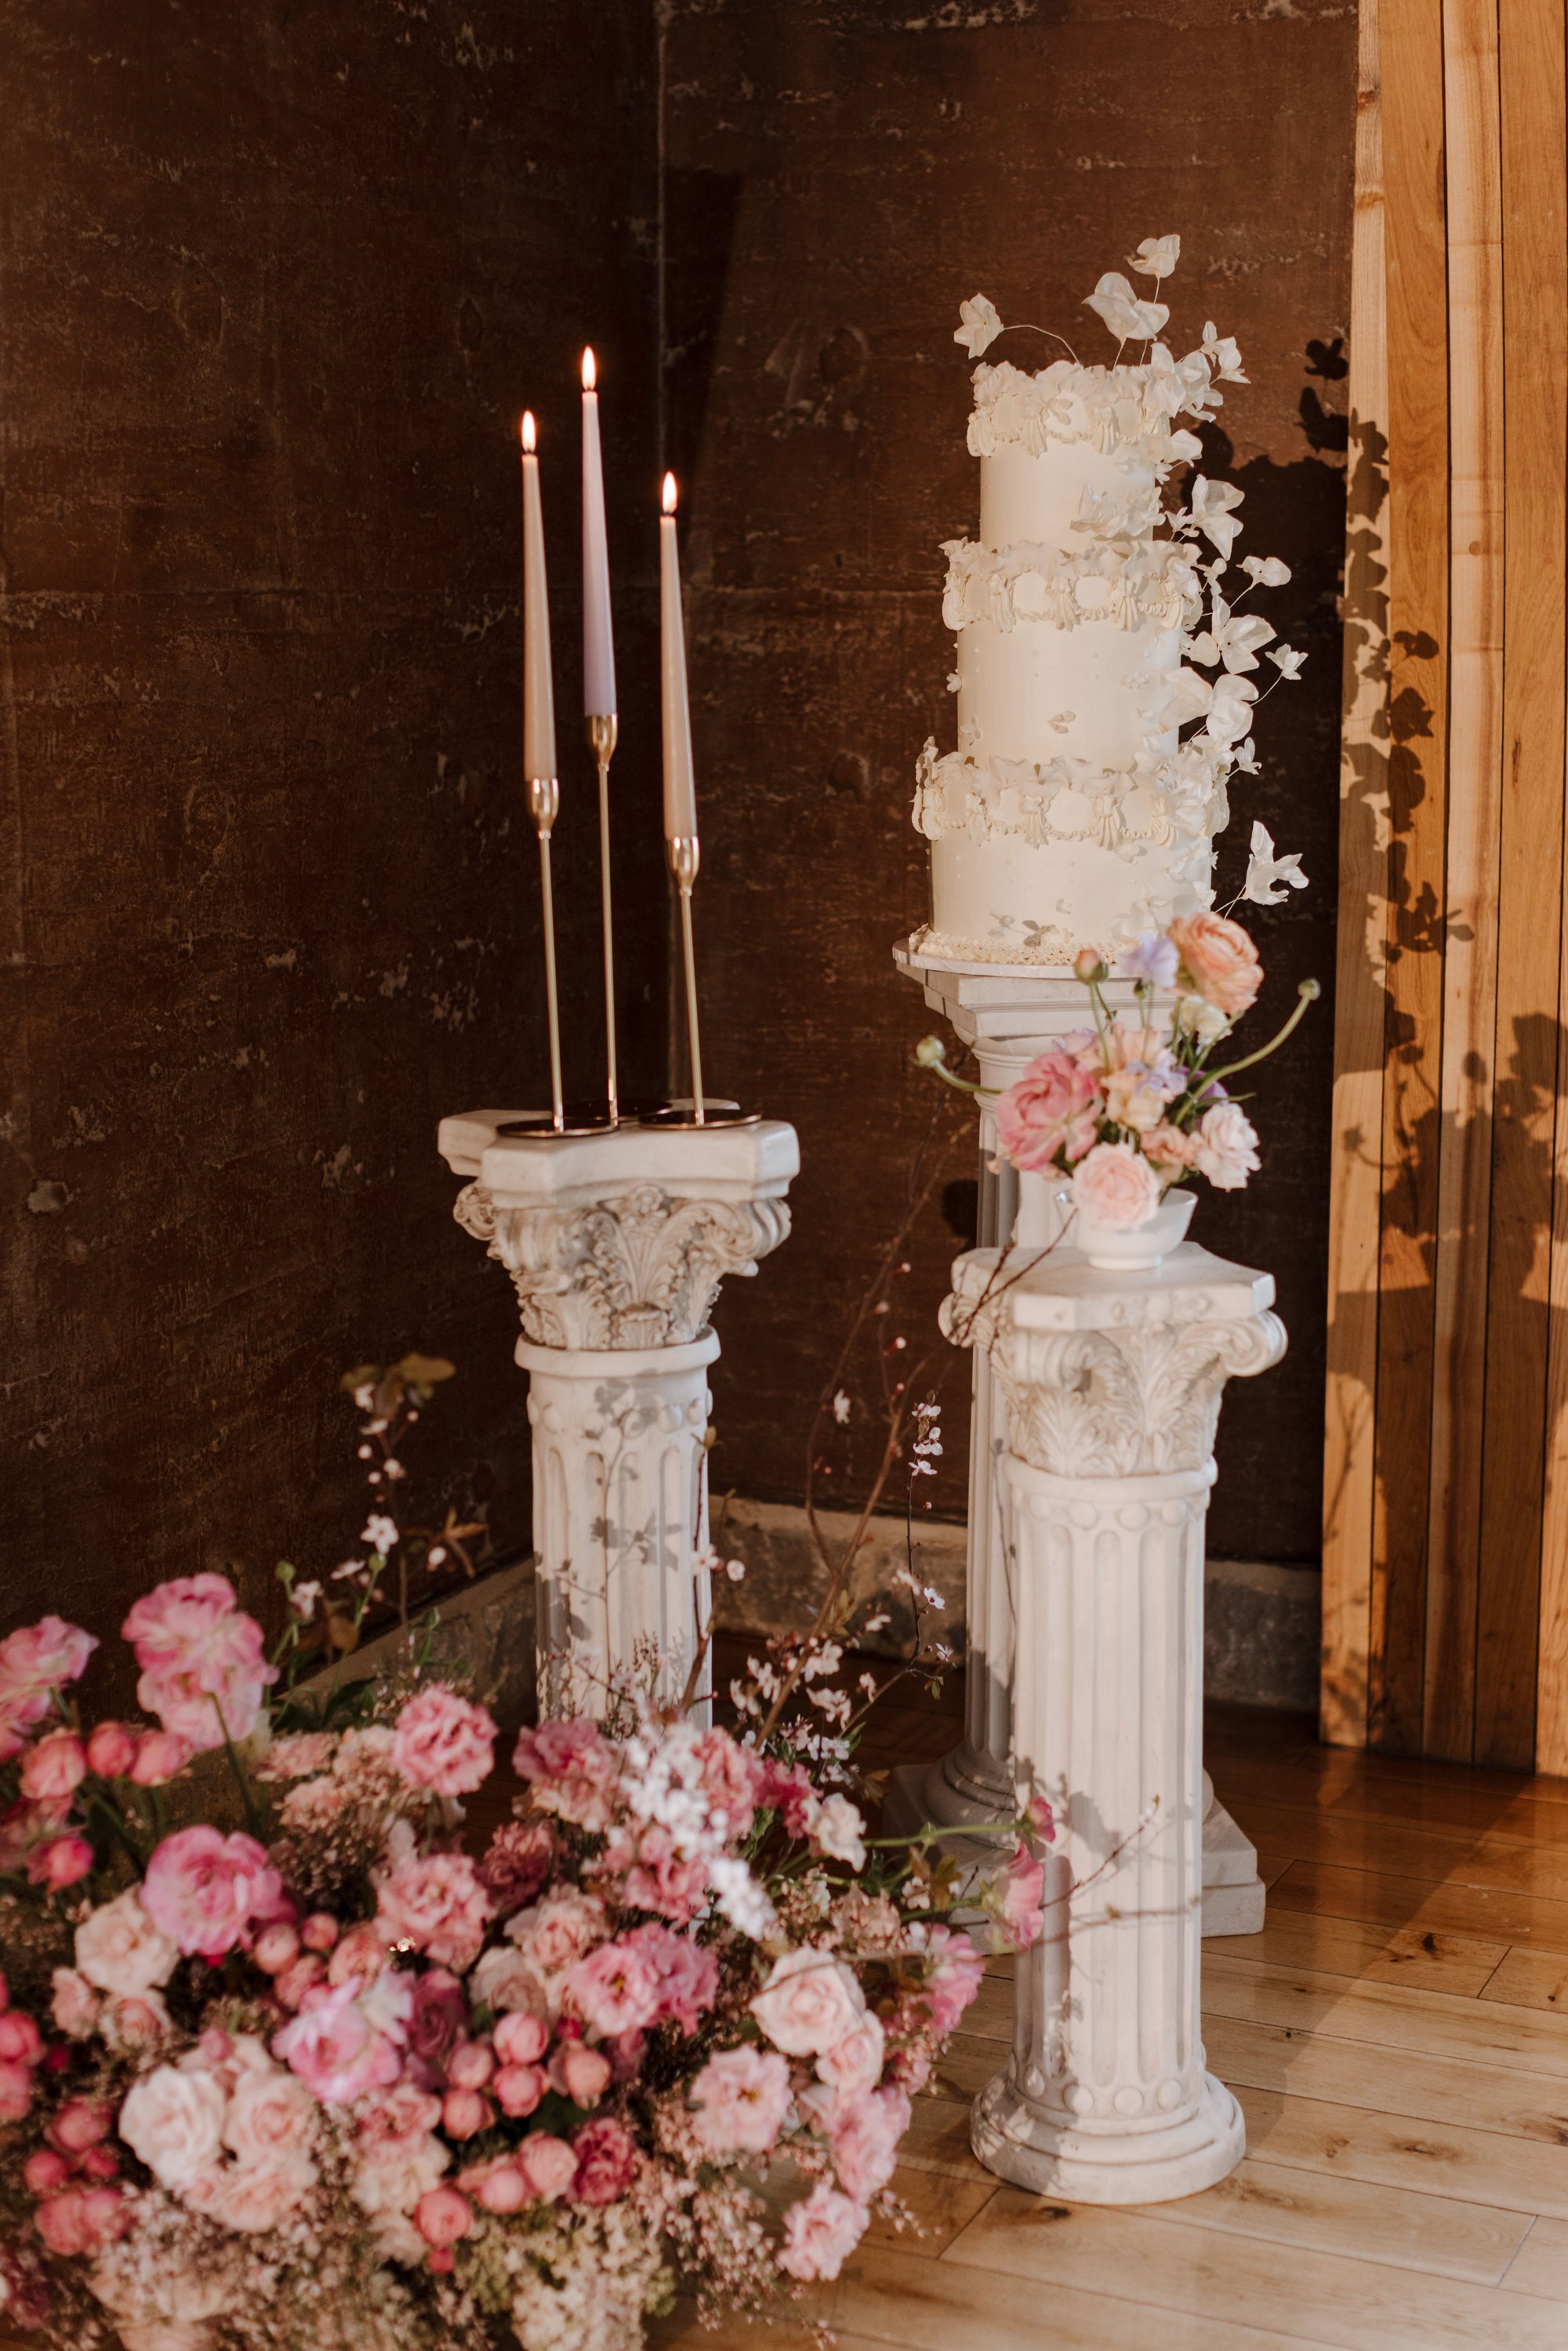 three tiered wedding cake on a roman column with beautiful soft pink flower arrangements at the base